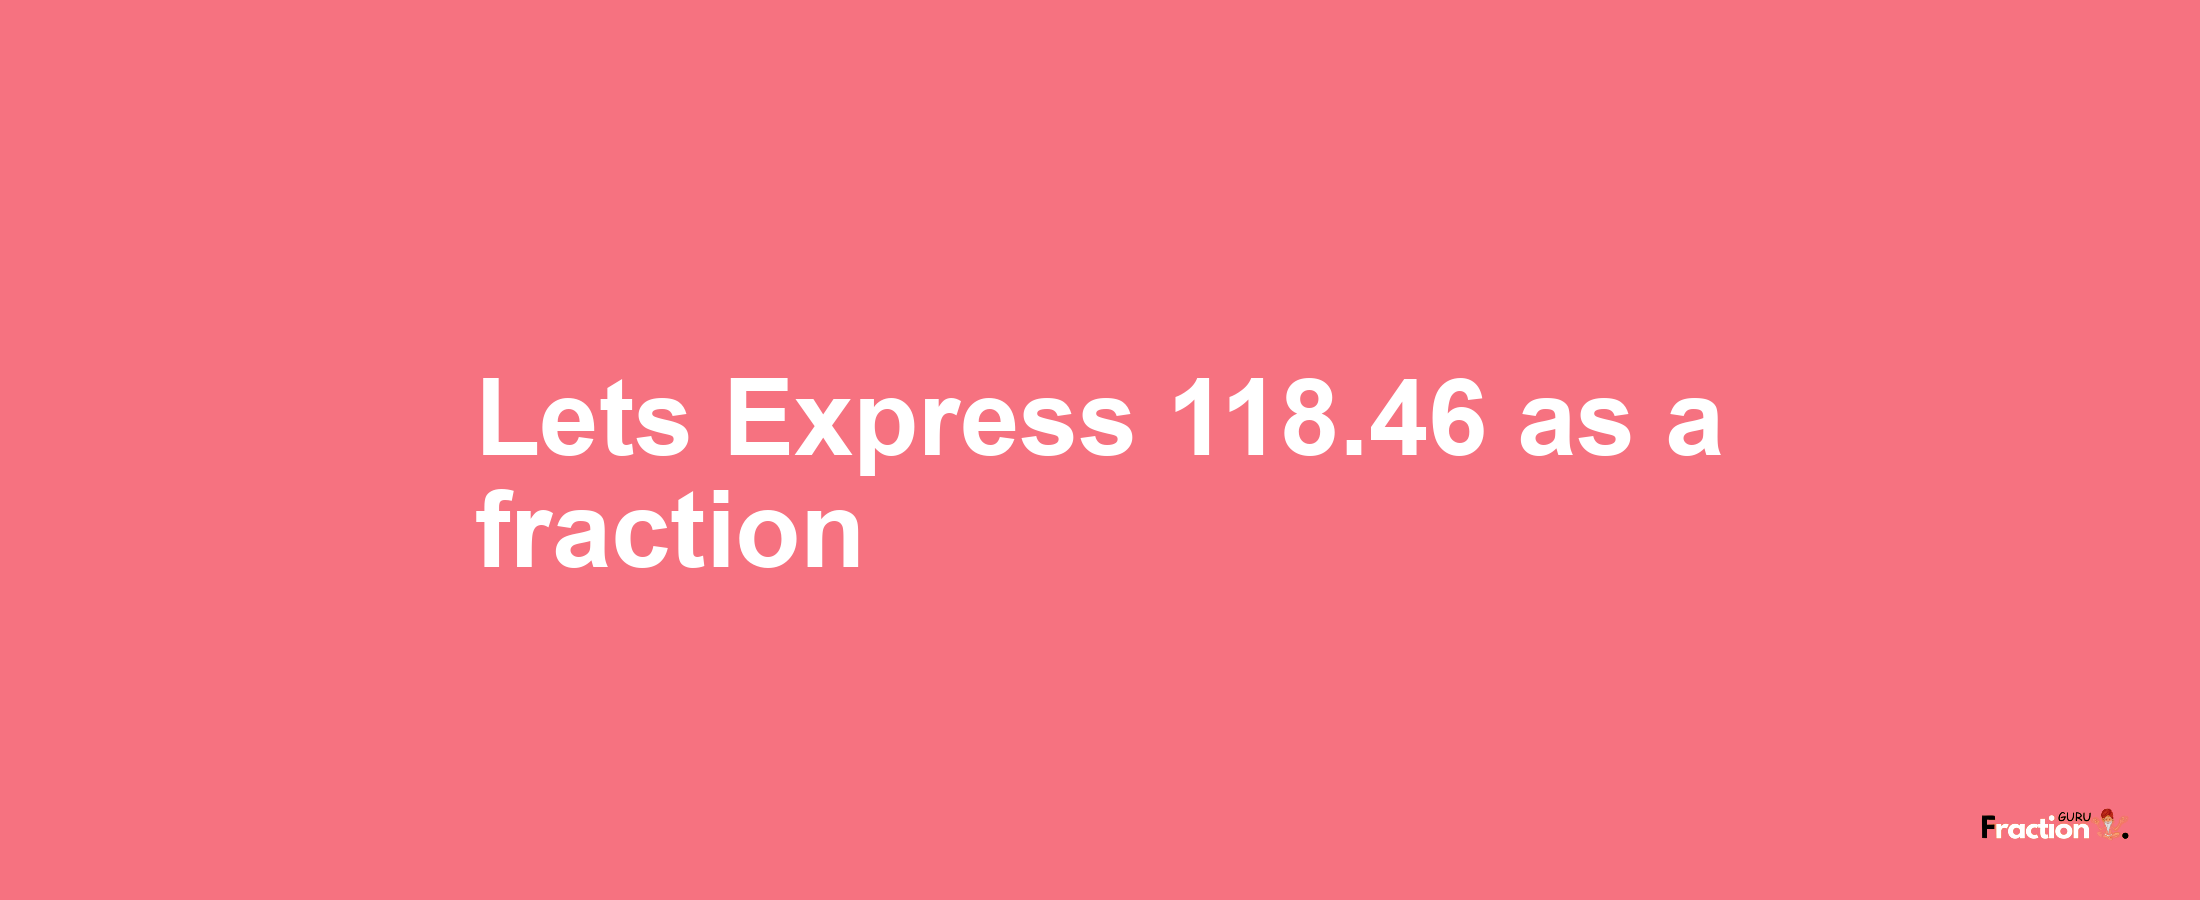 Lets Express 118.46 as afraction